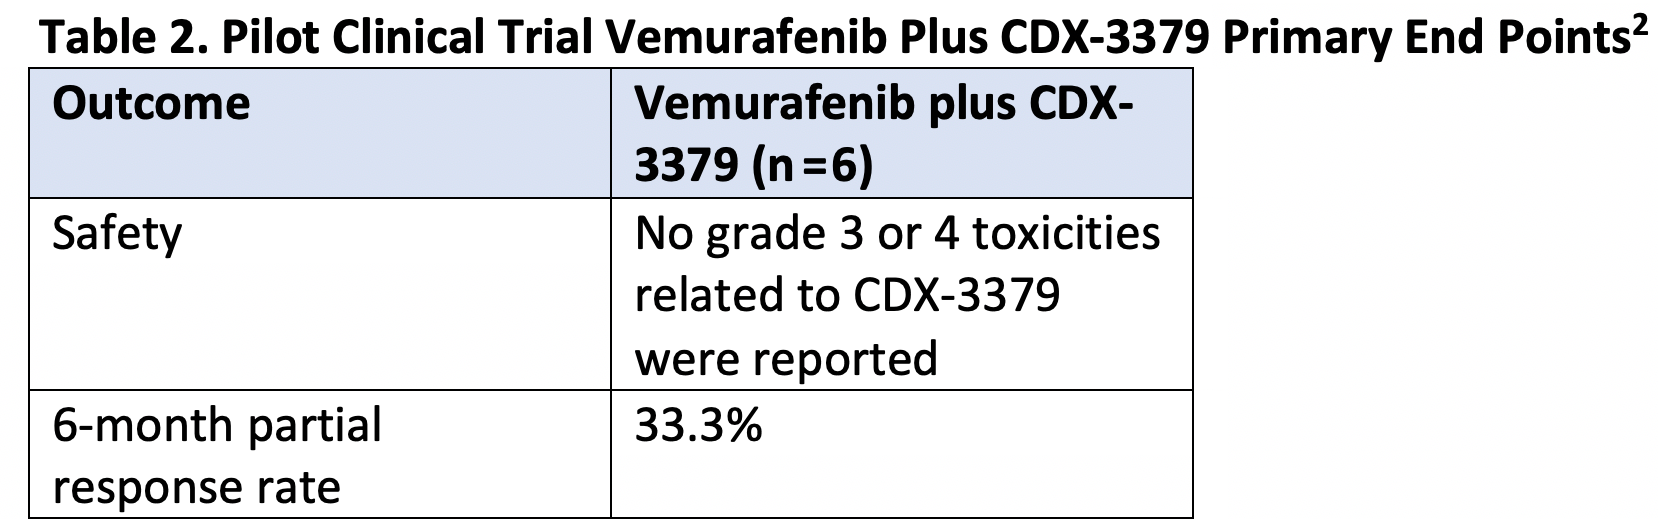 Table 2. Pilot Clinical trial Vemurafenib Plus CDX-3379 Primary End Points